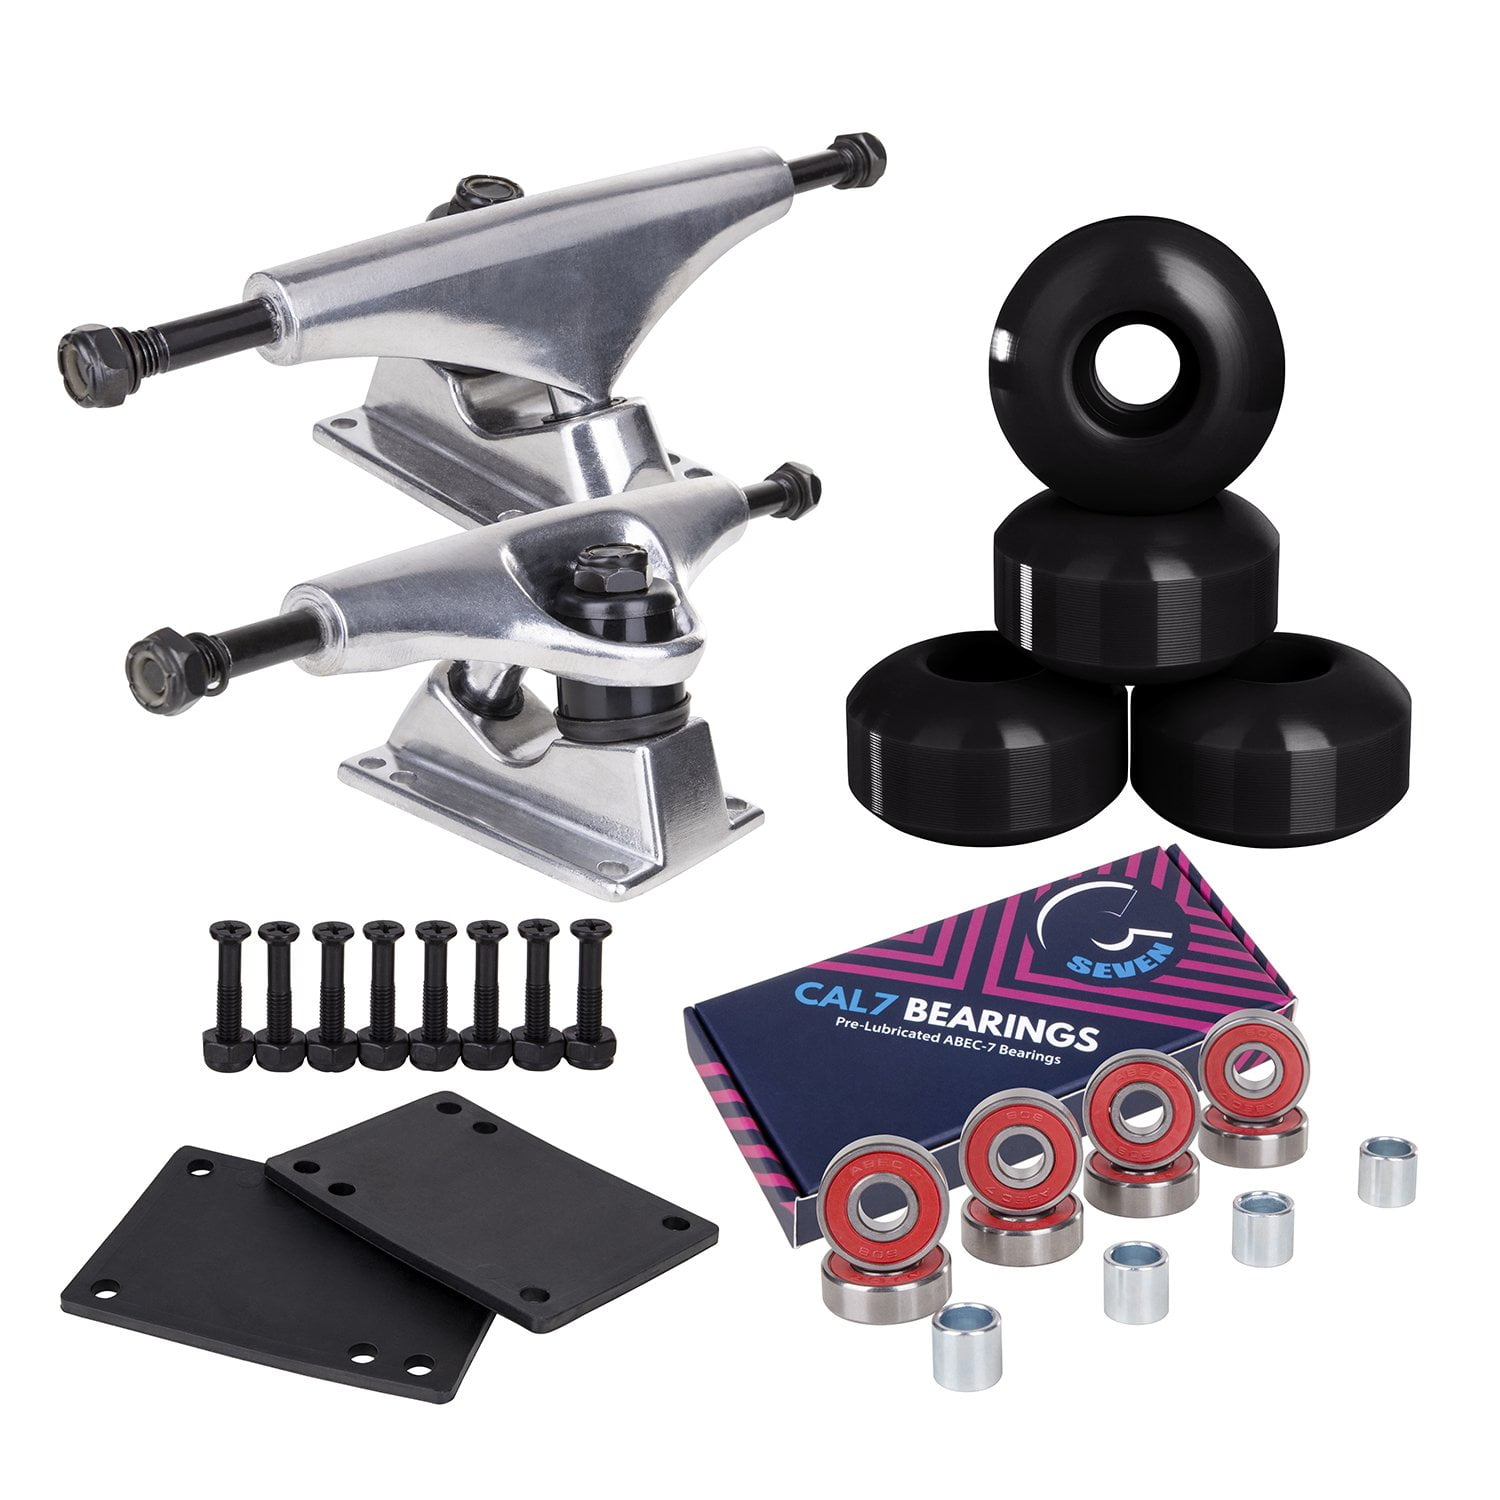 Cal 7 Skateboard Package Combo with 5 In. Trucks, 52 mm 99 A Wheels,  Complete Set of Bearings and Steel Hardware Silver Trucks, Black Wheels